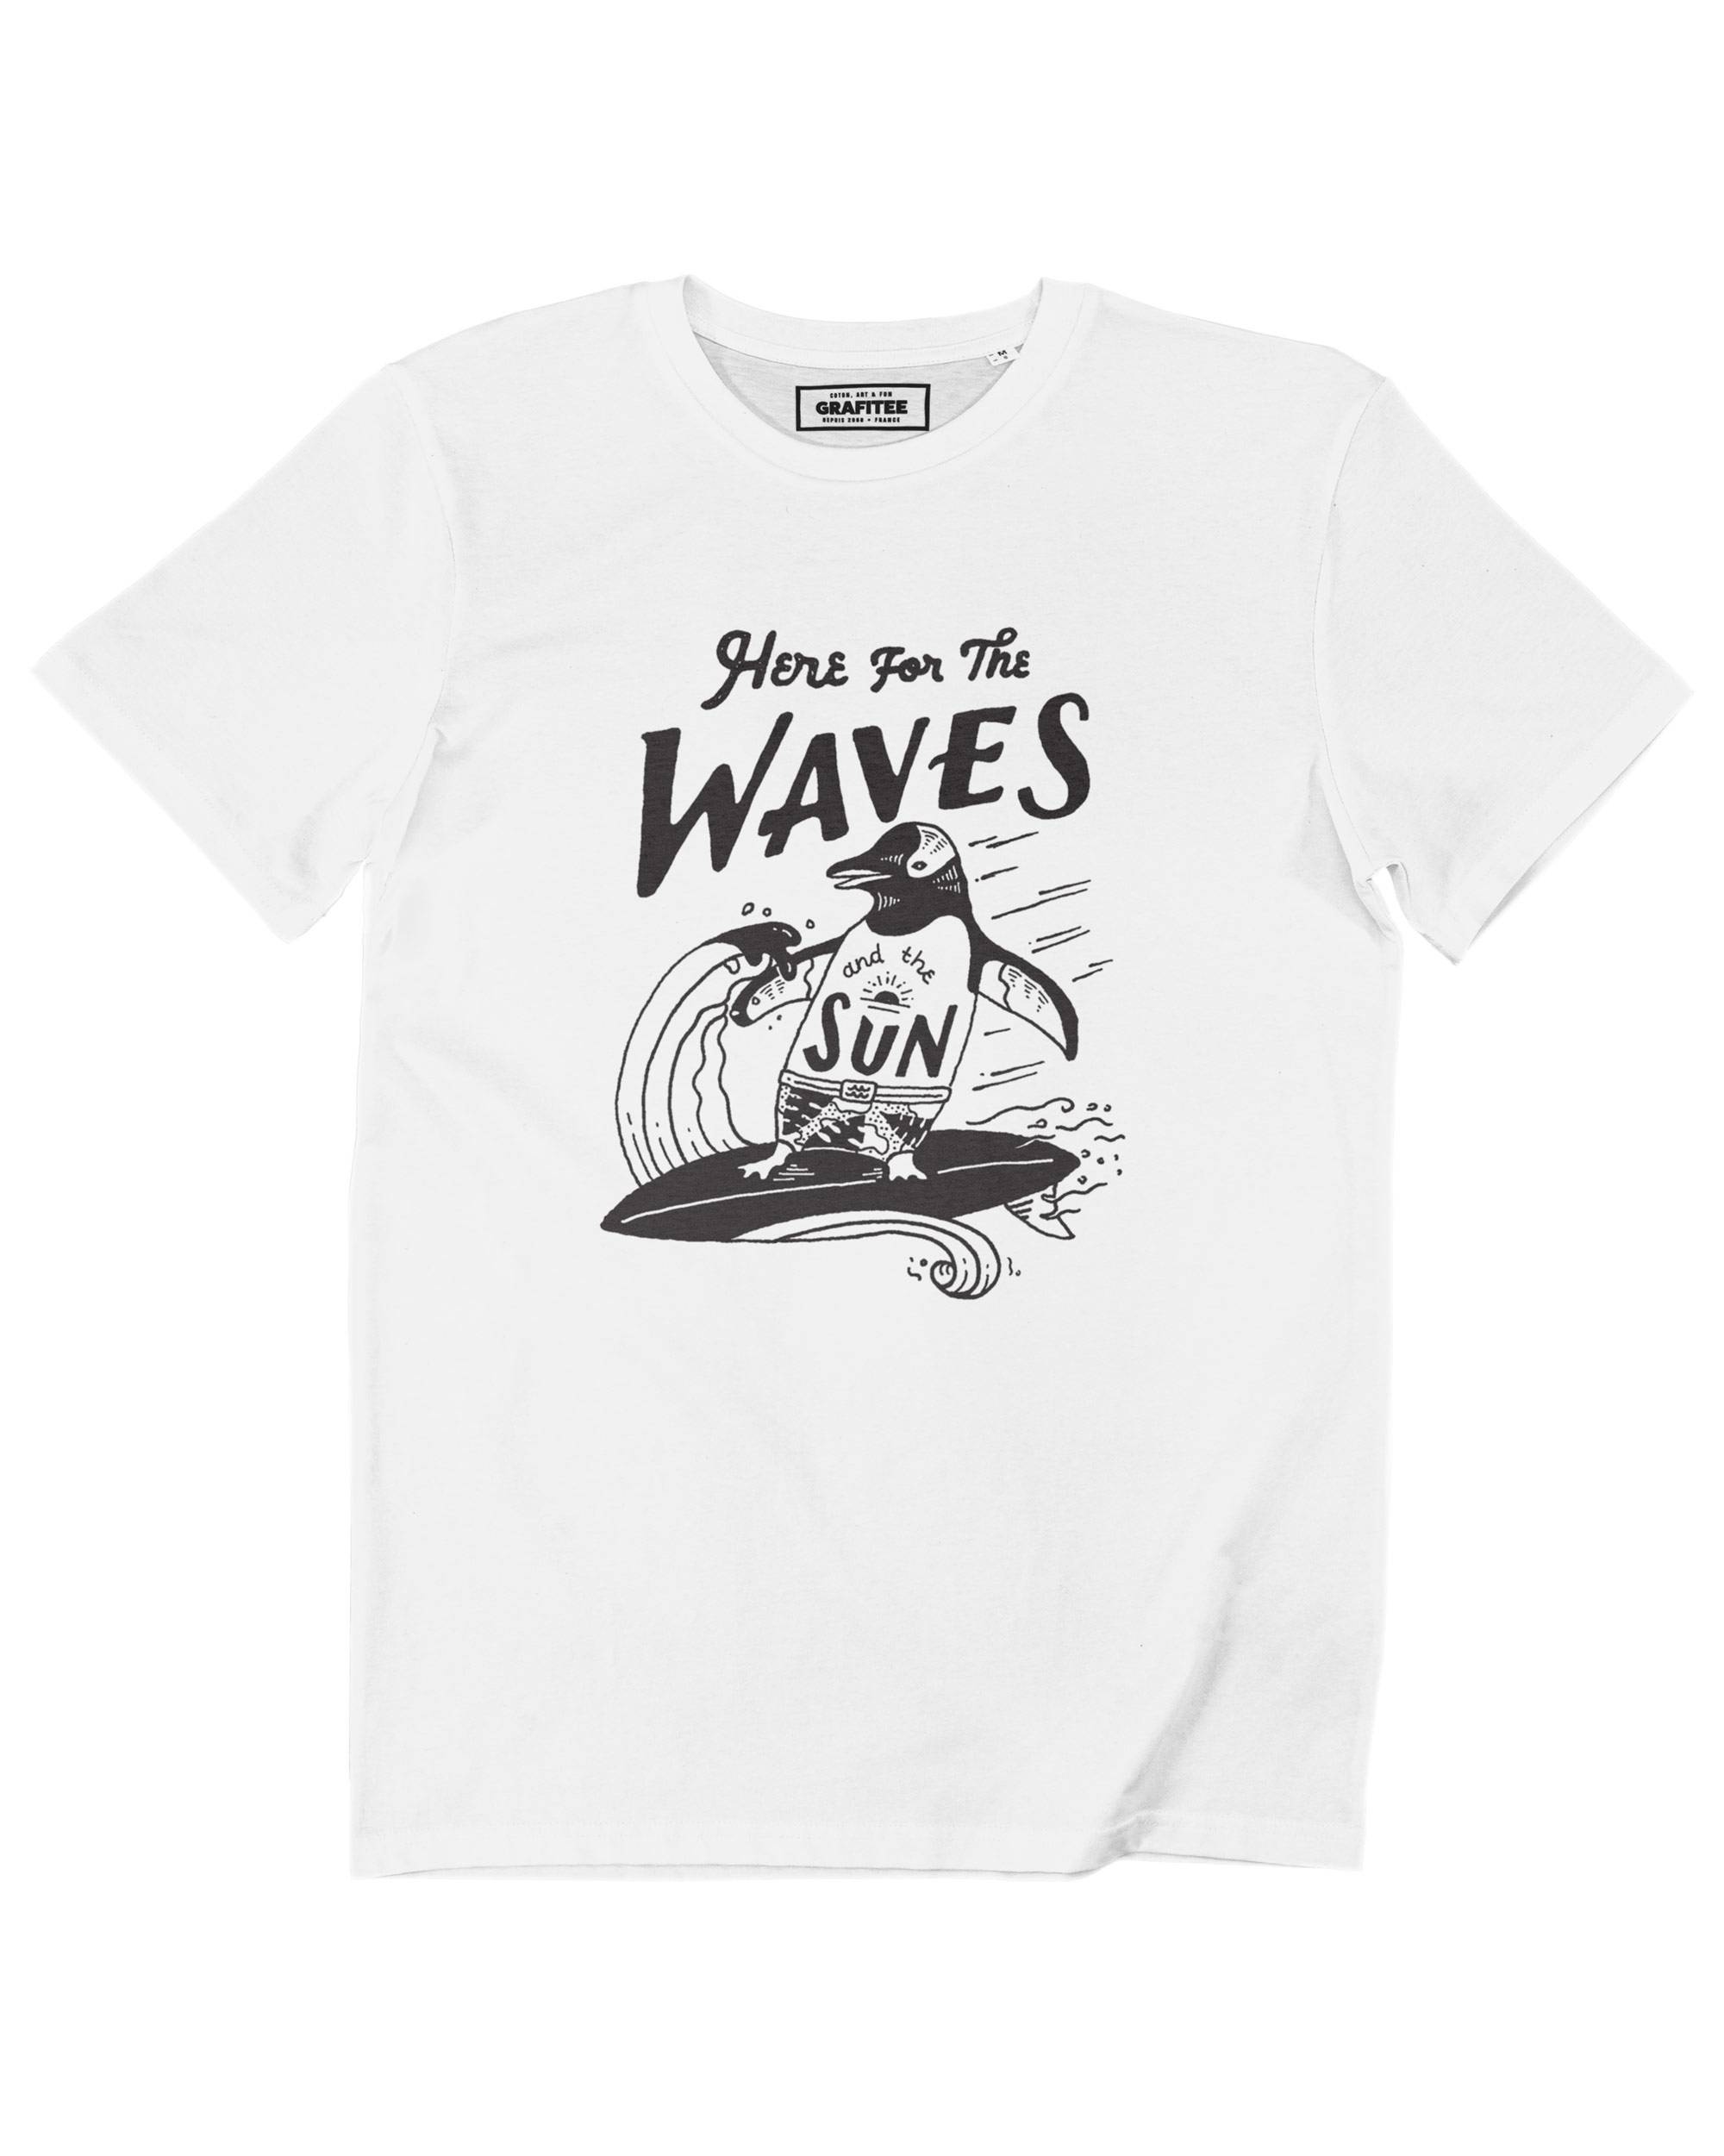 T-shirt Here for the waves Grafitee